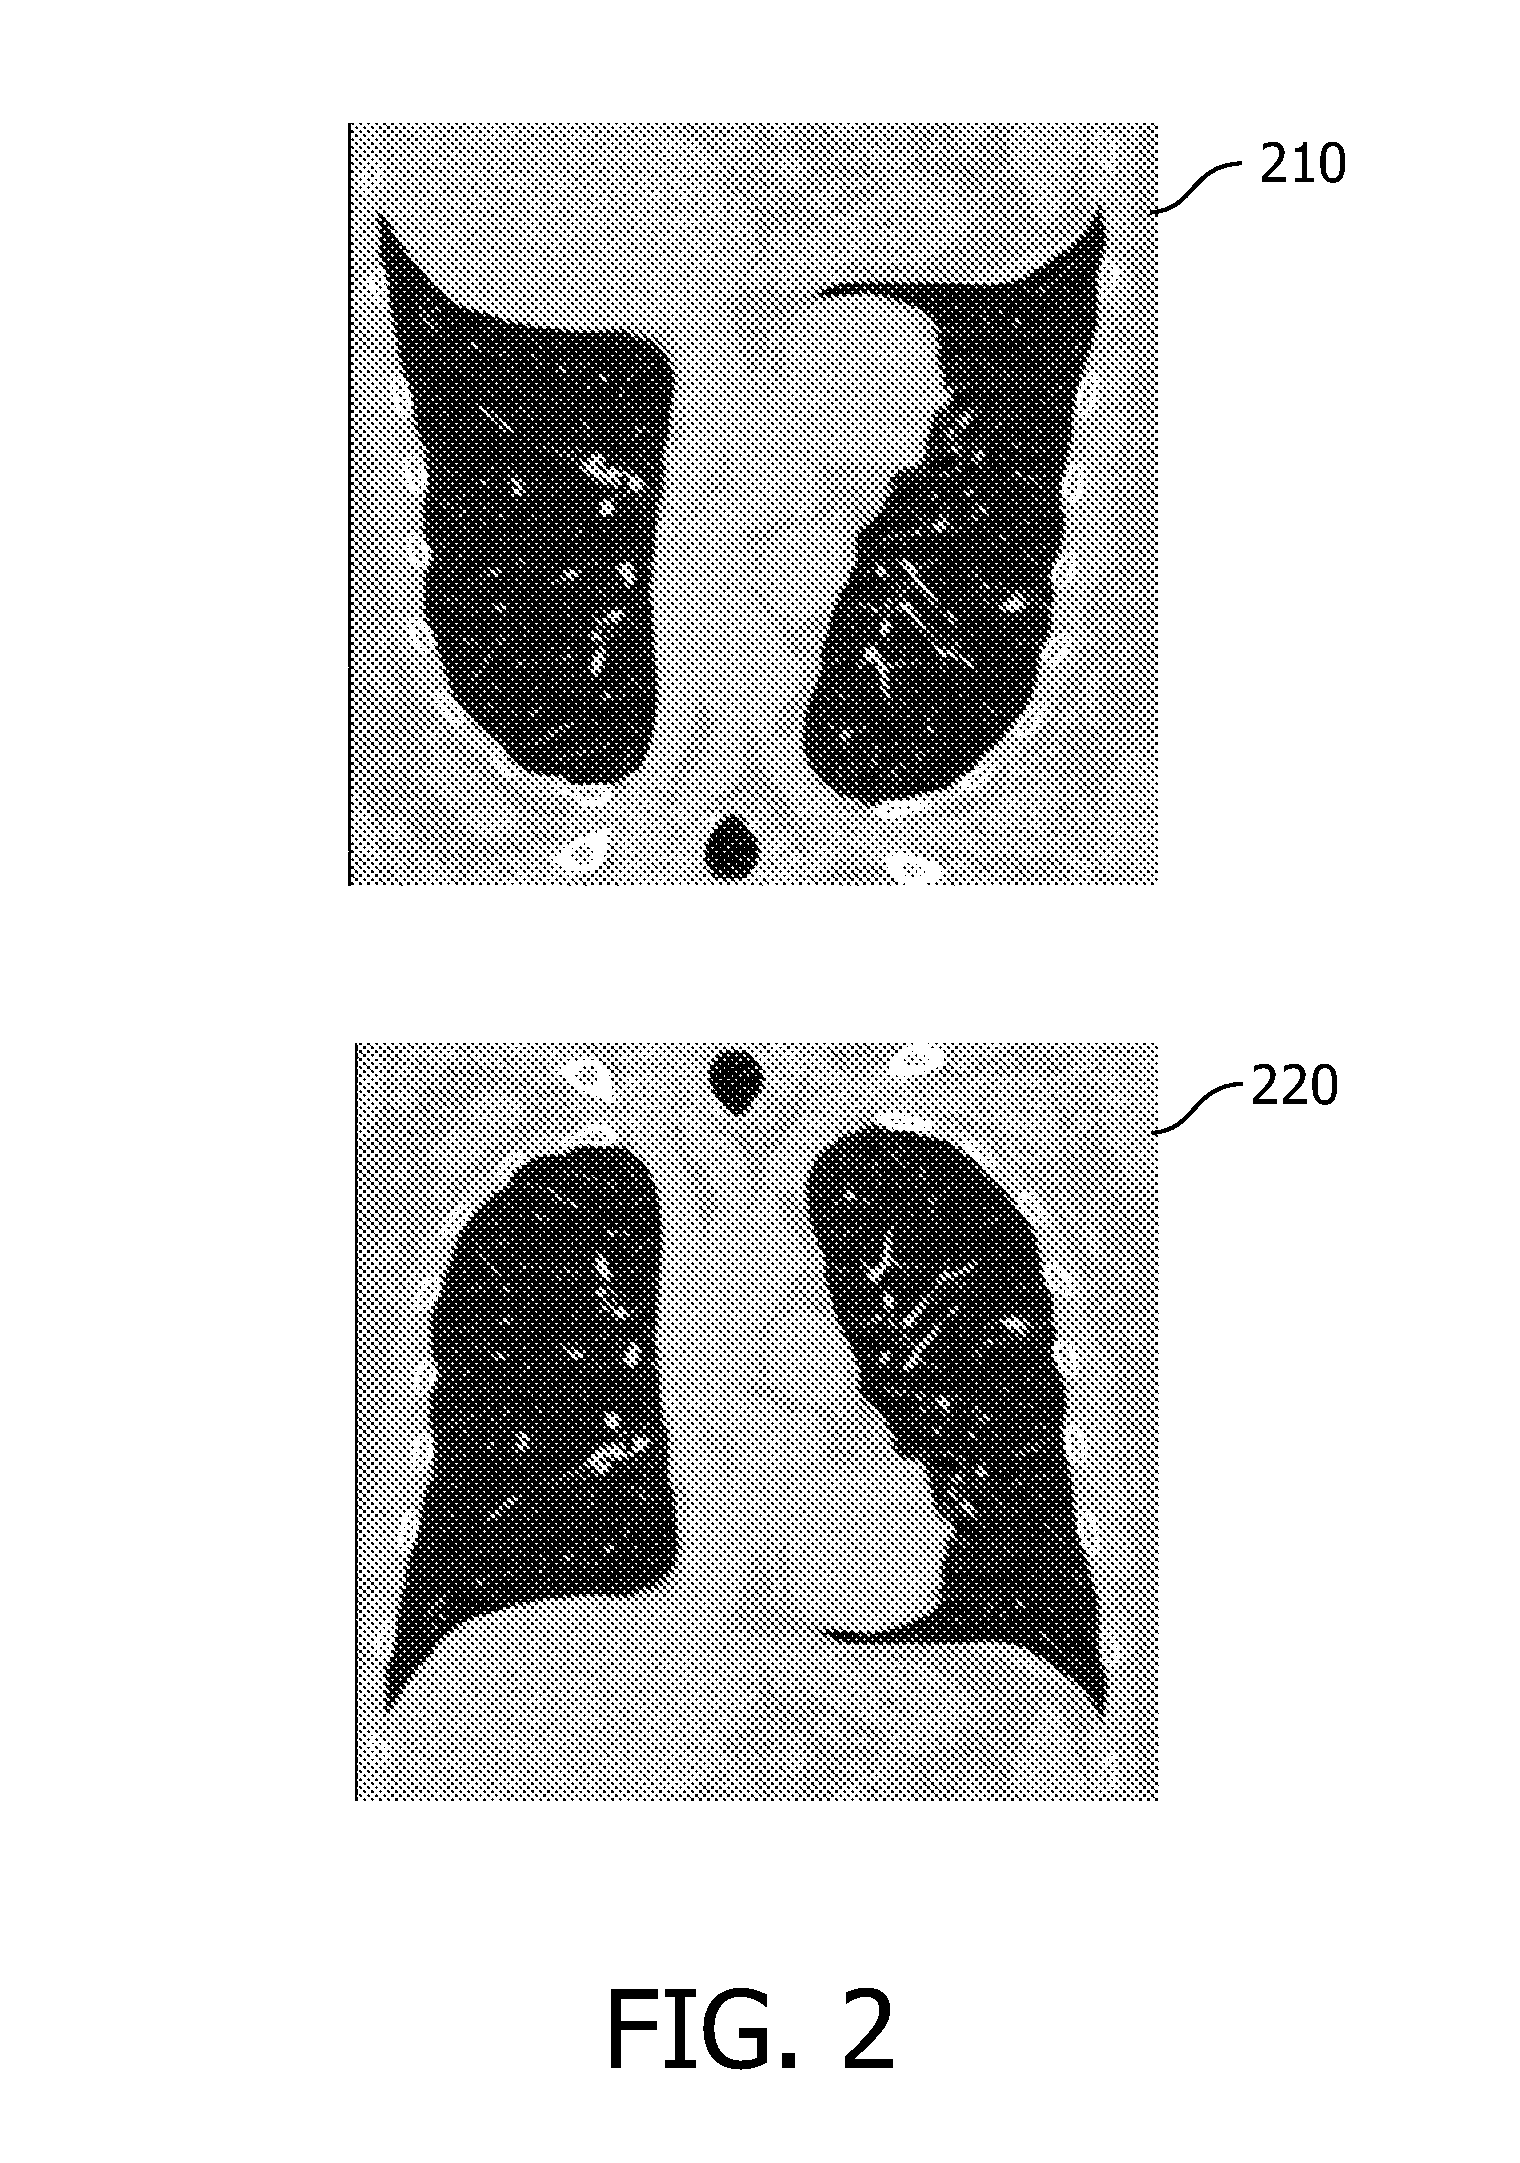 Method of automatically correcting mis-orientation of medical images